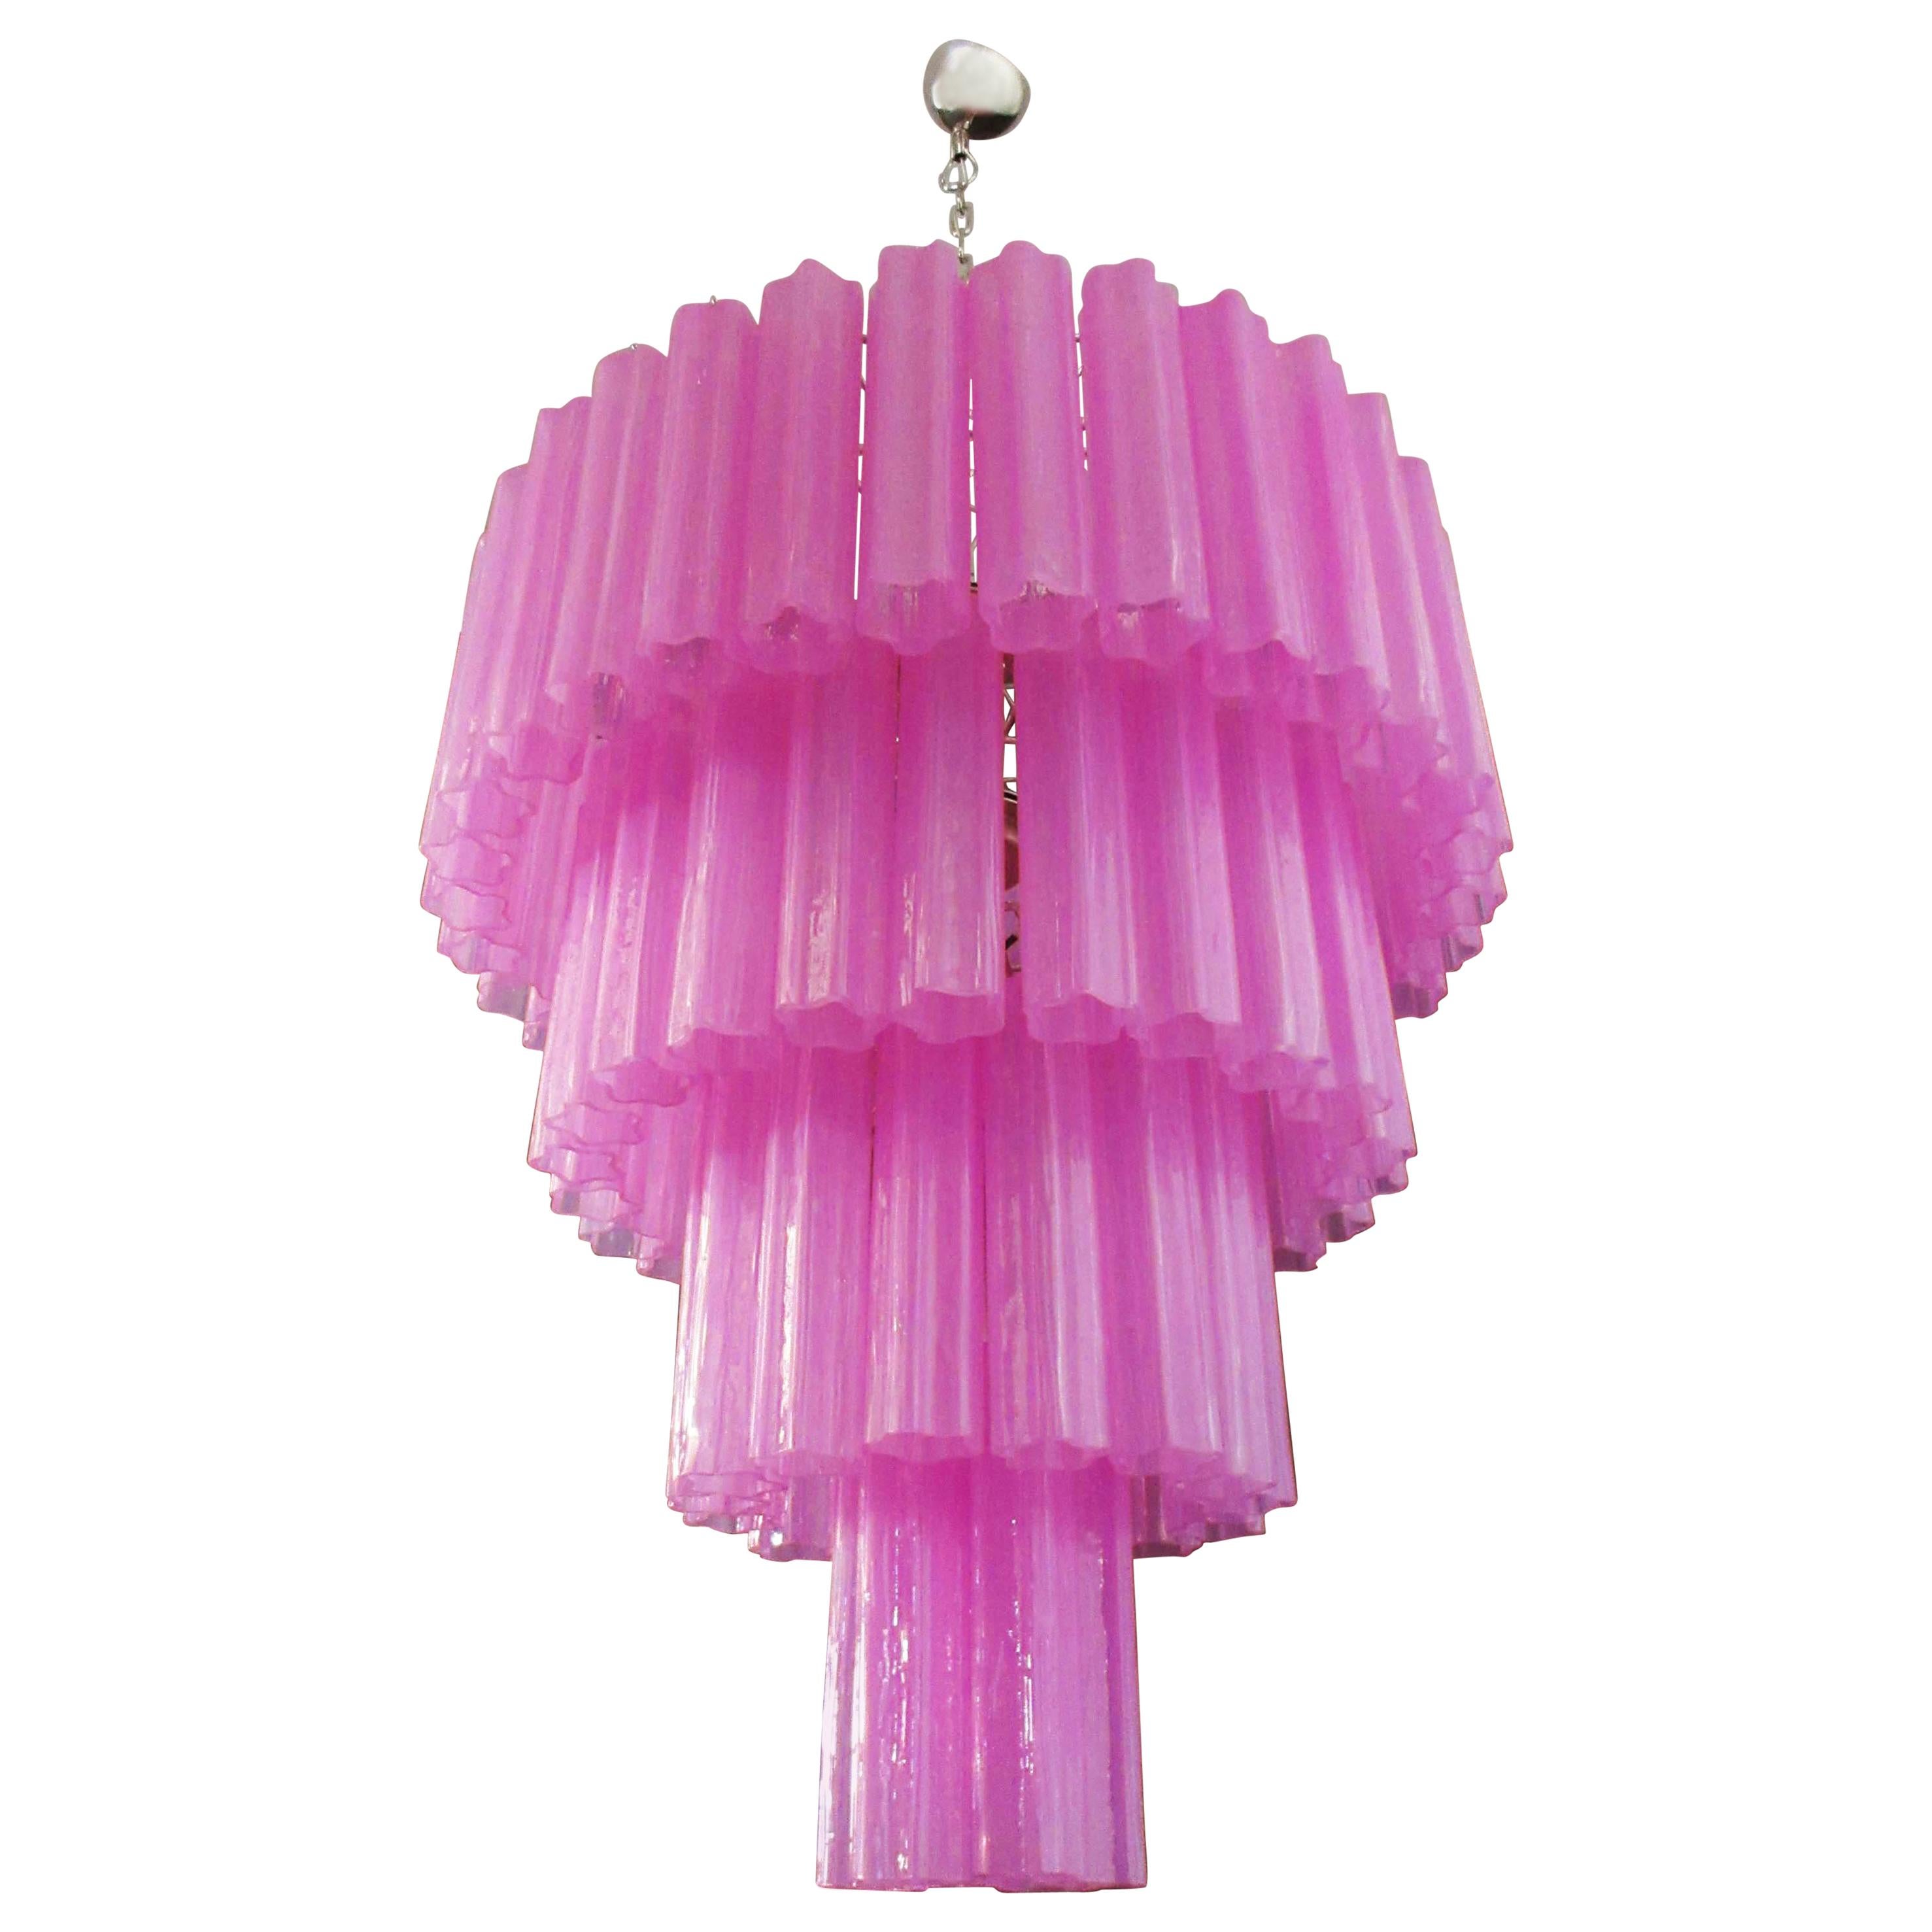 Huge Vintage Murano Glass Tiered Chandelier - 78 Glasses - Pink Fuxia Silk